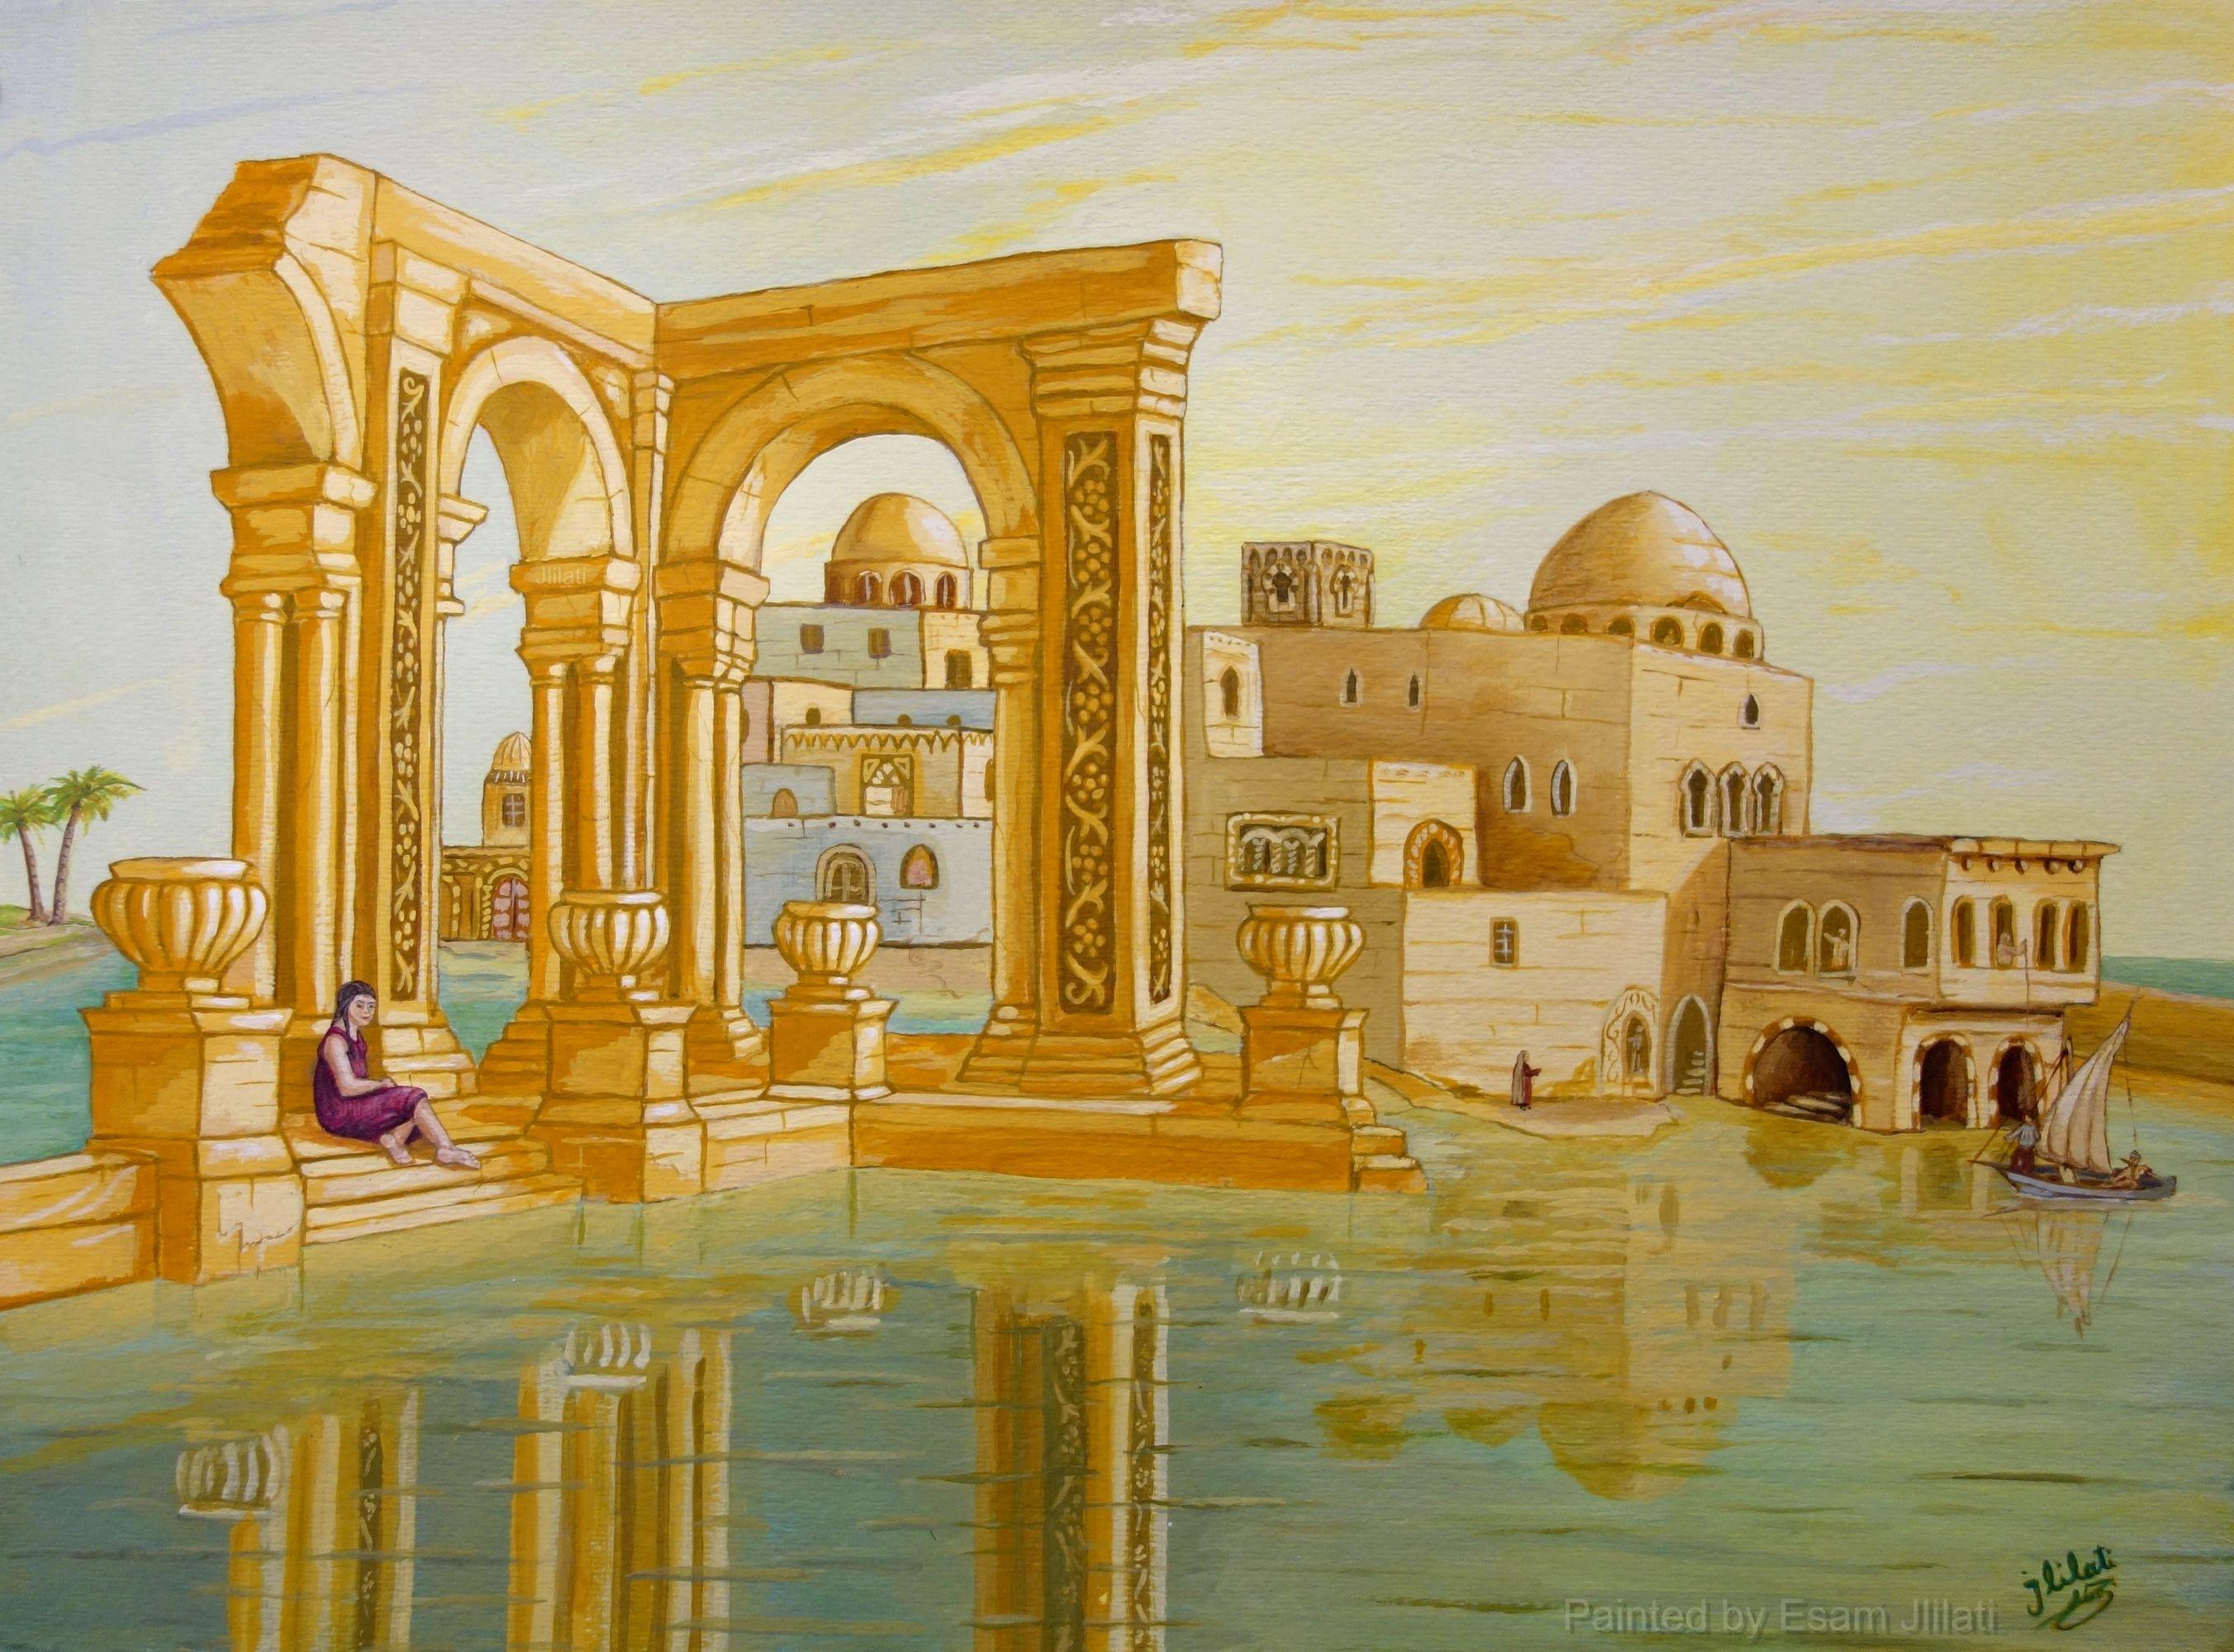 Mediterranean Dream  Original acrylic painting, Modern Art, landscape seascape Surrealism Egyptian oriental Architecture     :: Painting :: Classical :: This piece comes with an official certificate of authenticity signed by the artist :: Ready to